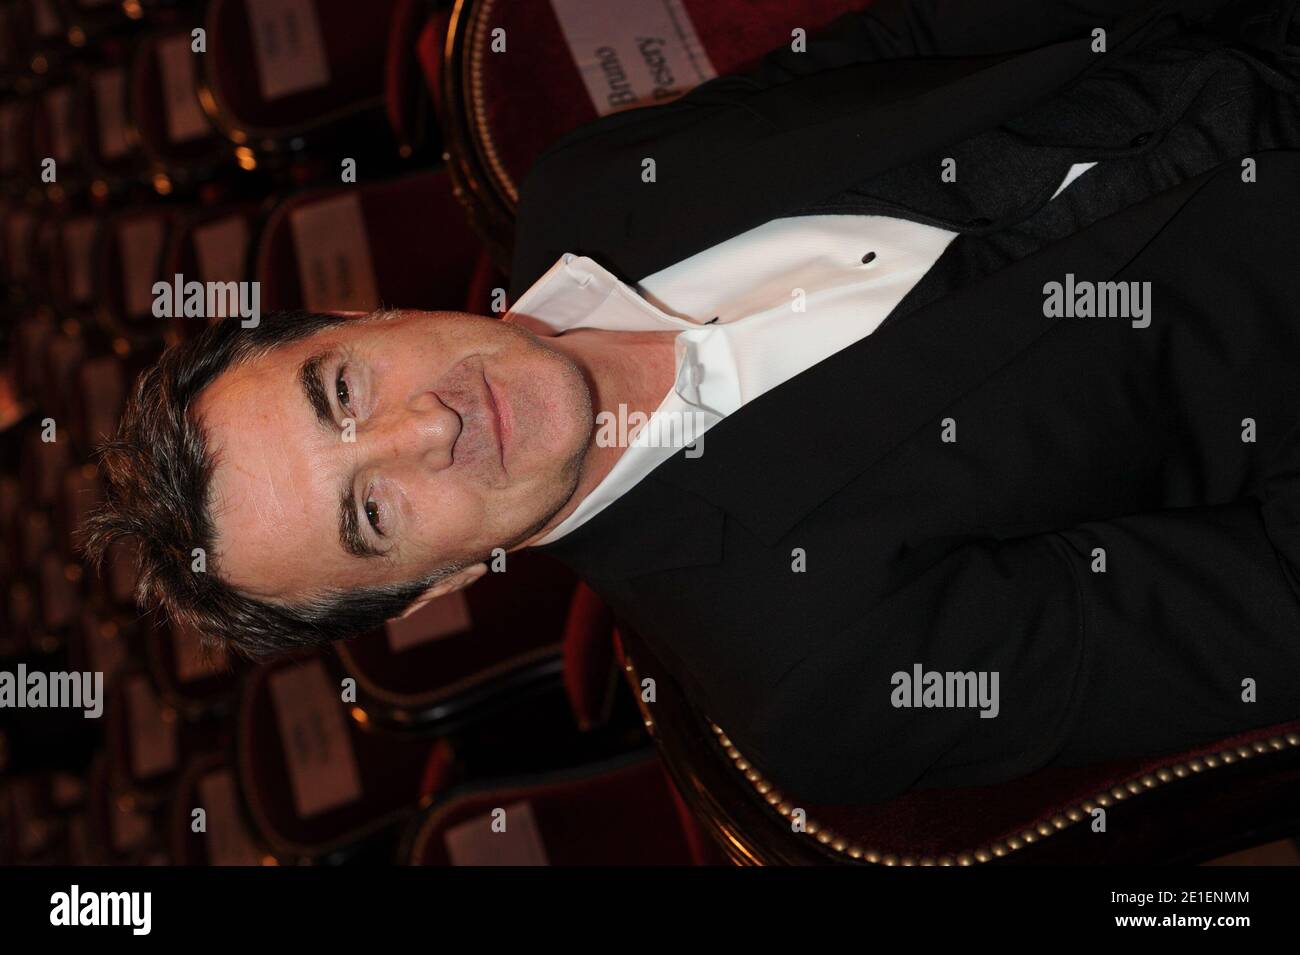 Francois Cluzet during the 36th Cesar Film Awards ceremony held at the Theatre du Chatelet in Paris, France on February 25, 2011. Photo by Nicolas Gouhier/ABACAPRESS.COM Stock Photo